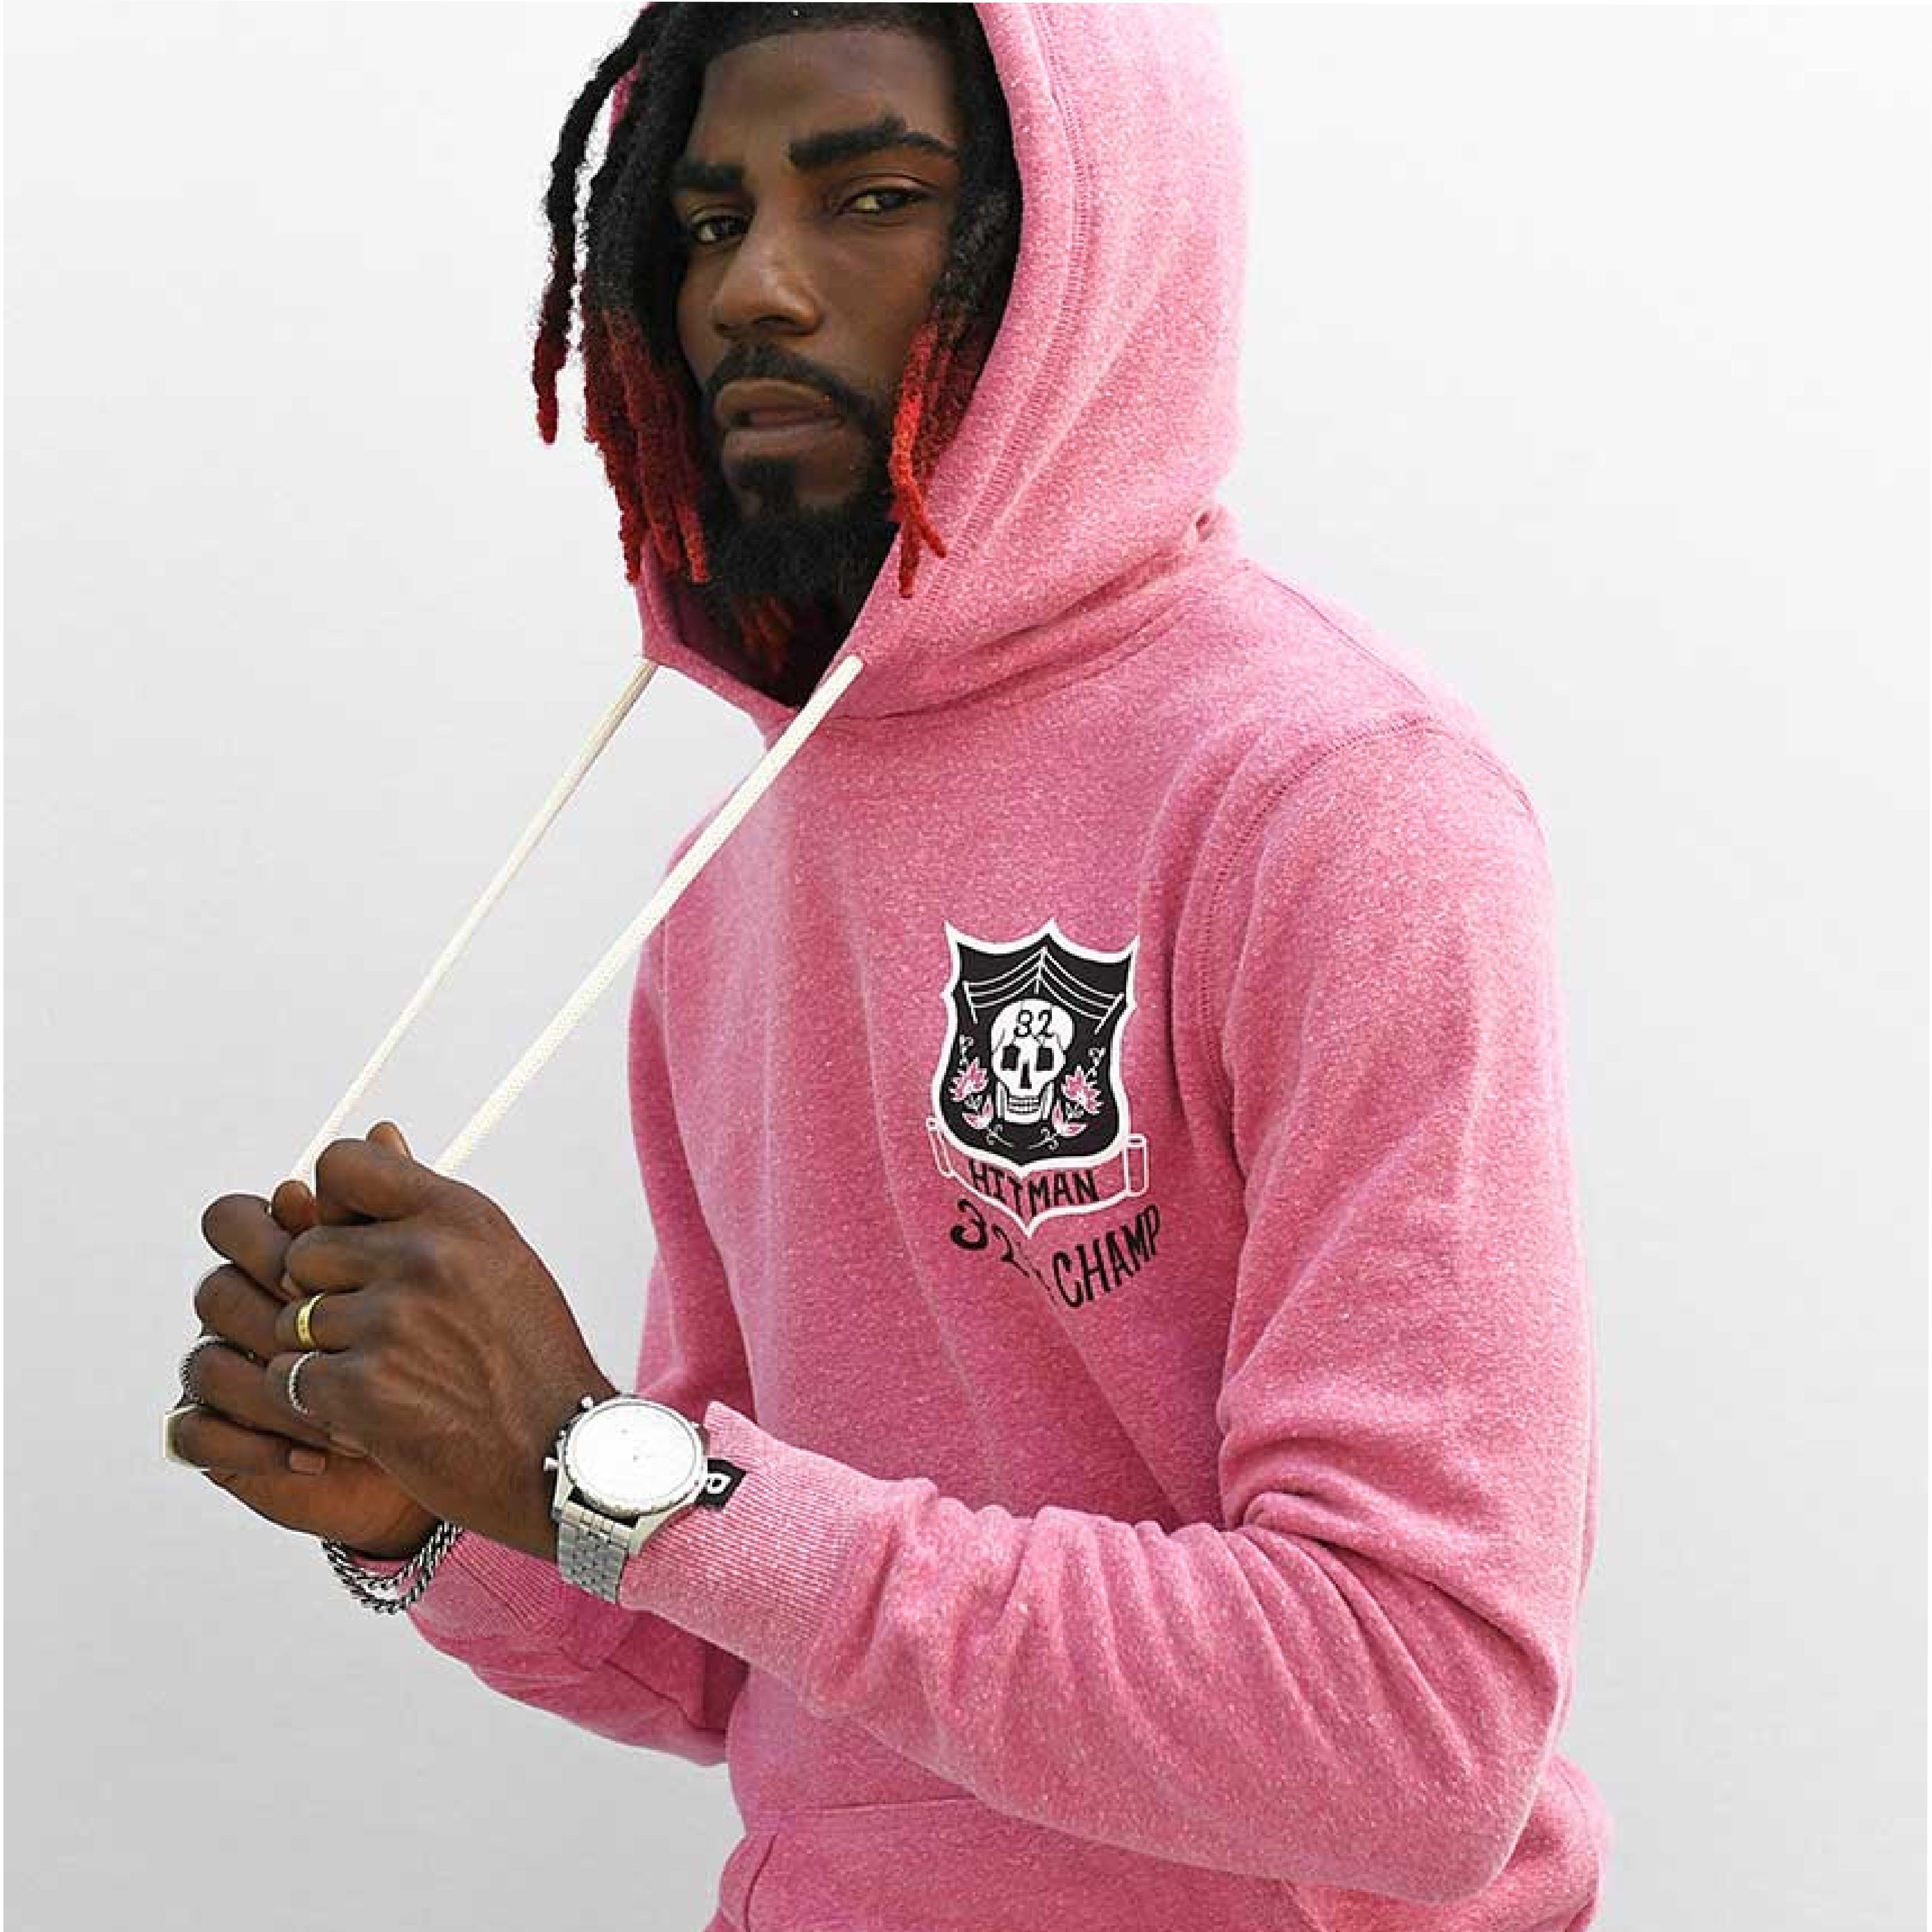 Man in pink hoodie pulling drawstring, against gray background.